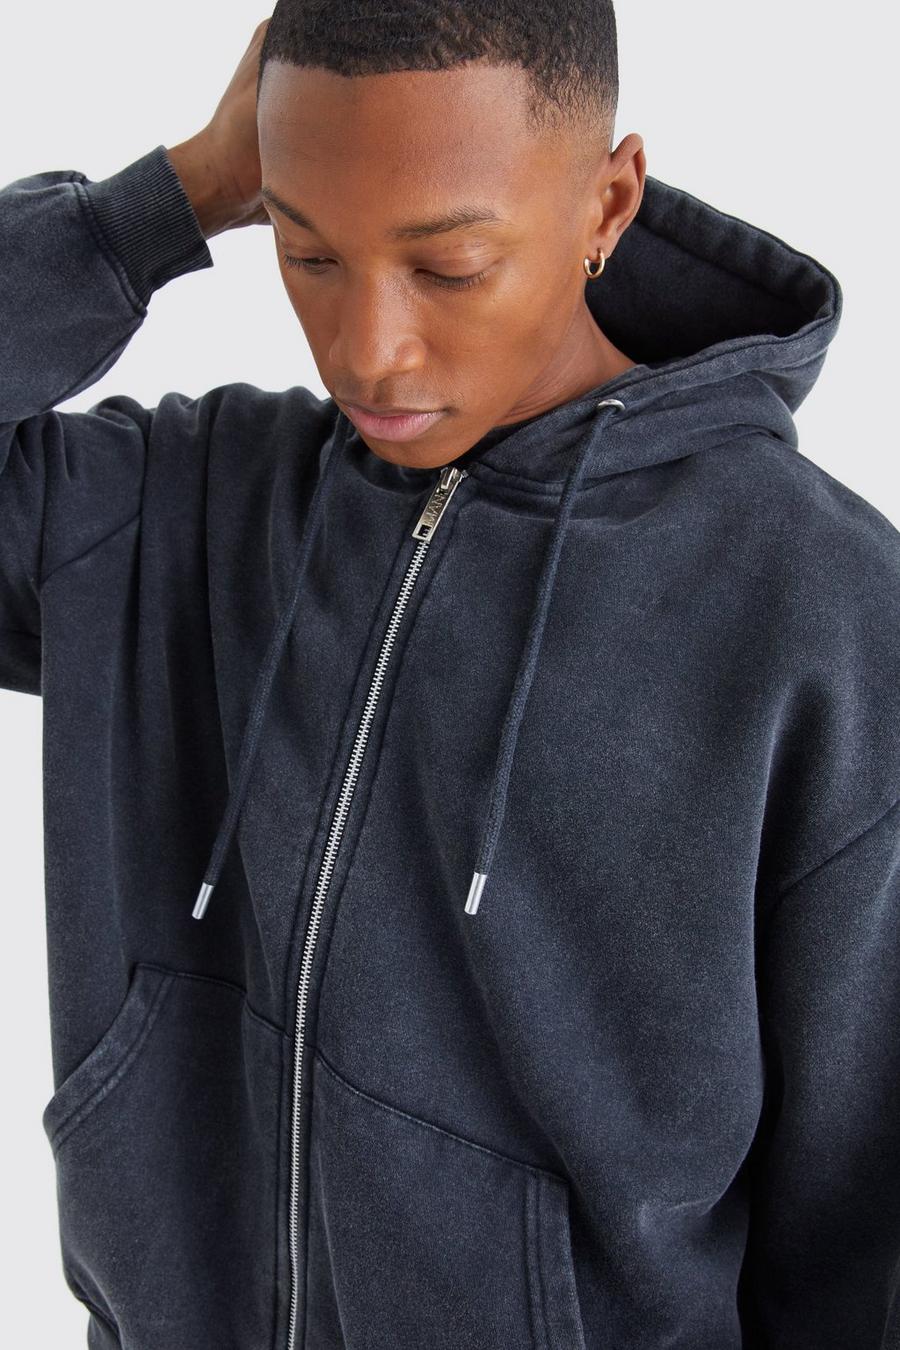 Mono B oversized mineral washed hoodie – thehcrewcompany